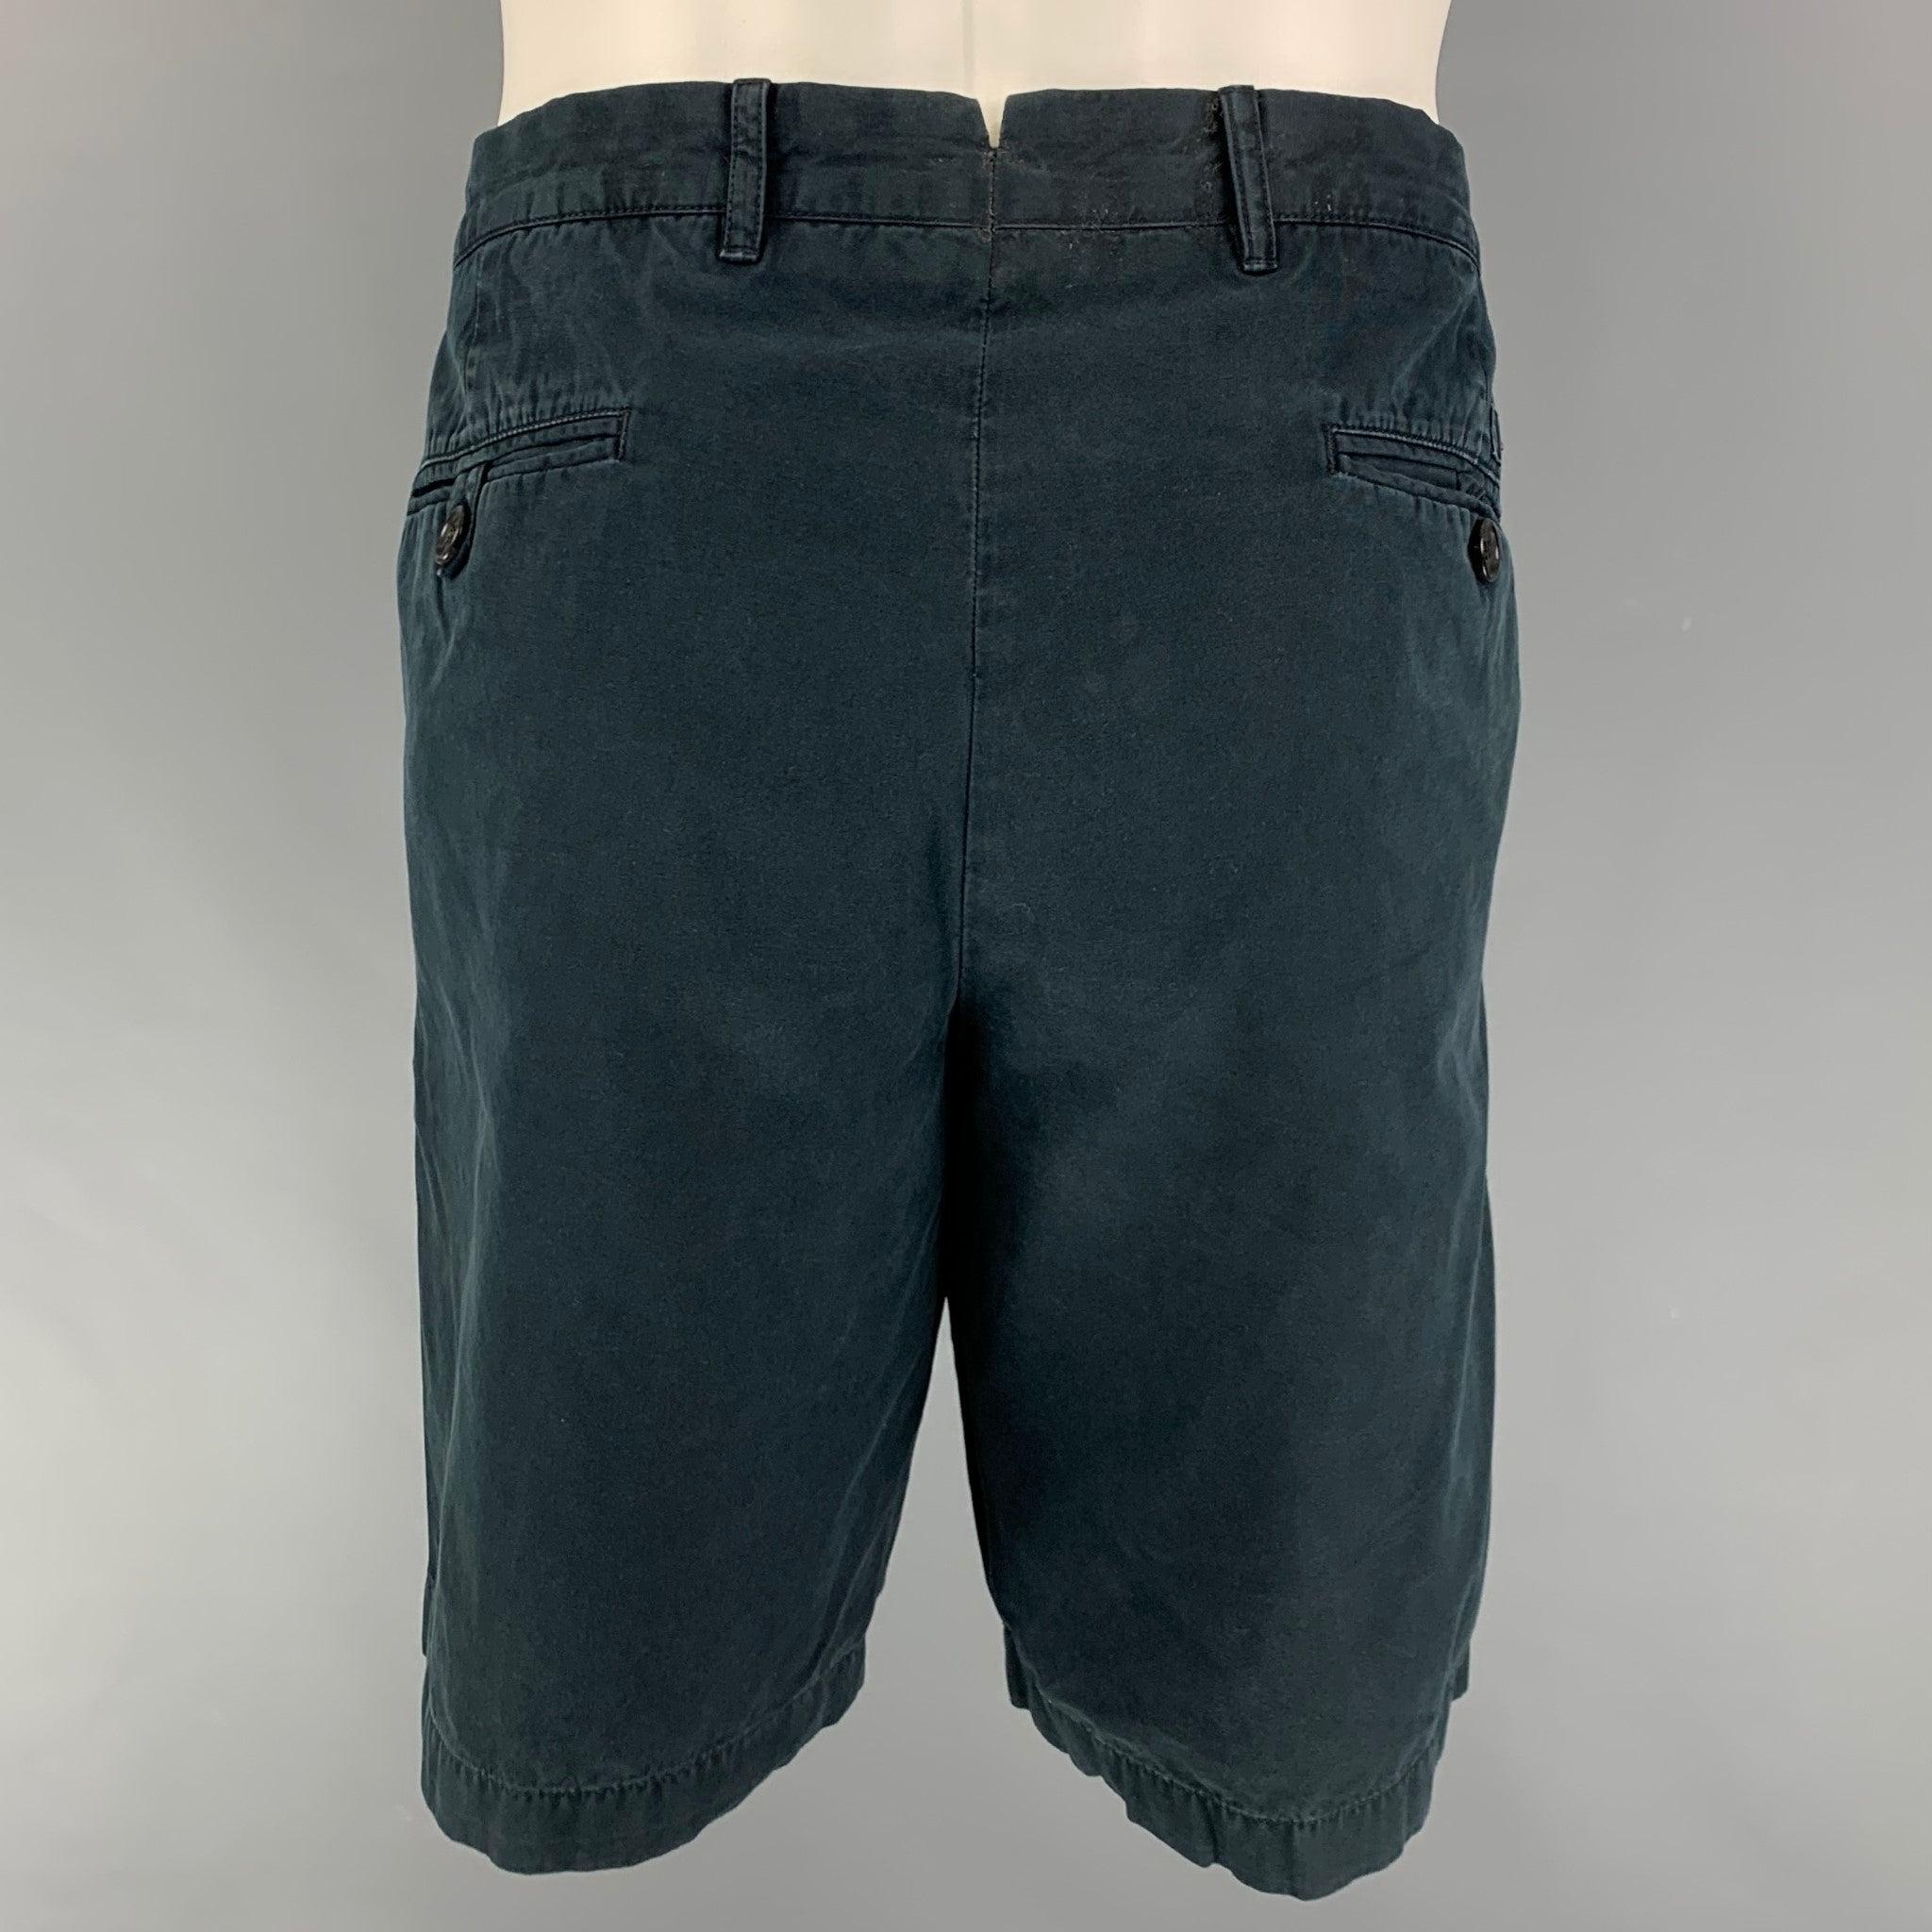 PRADA shorts comes in a navy cotton featuring a zip fly closure.
Good
Pre-Owned Condition. Missing zipper detail. As-Is.  

Marked:   54 

Measurements: 
  Waist: 36 inches  Rise: 9.5 inches  Inseam: 10 inches 
  
  
 
Reference: 117956
Category: